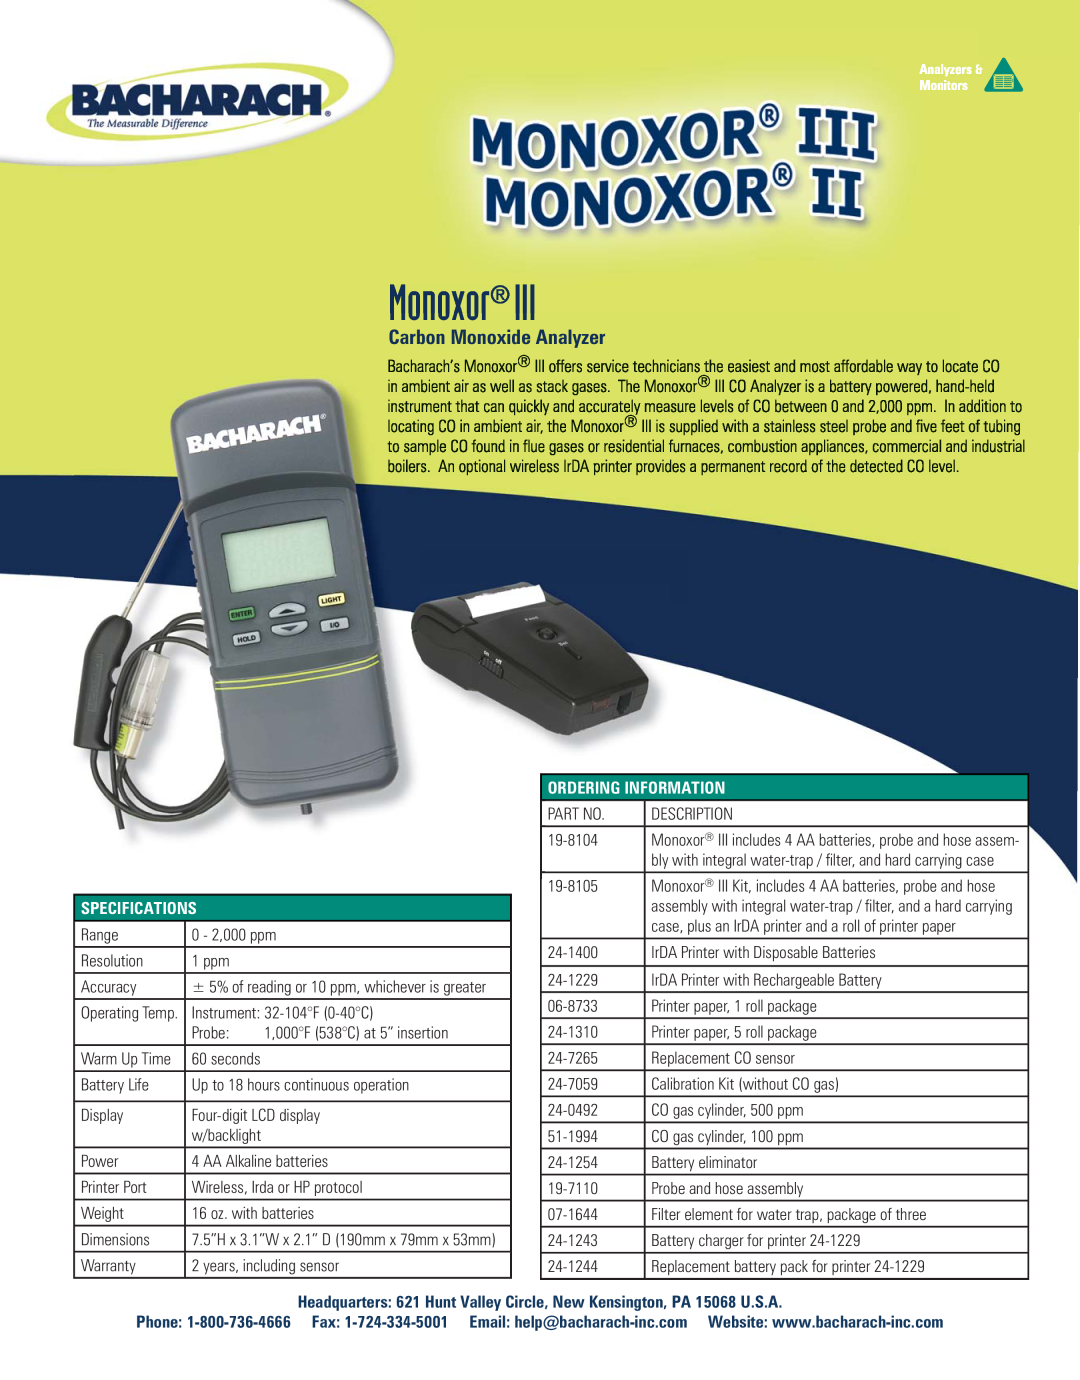 Bacharach III specifications Monoxor, Carbon Monoxide Analyzer, Ordering Information, Specifications, Probe 